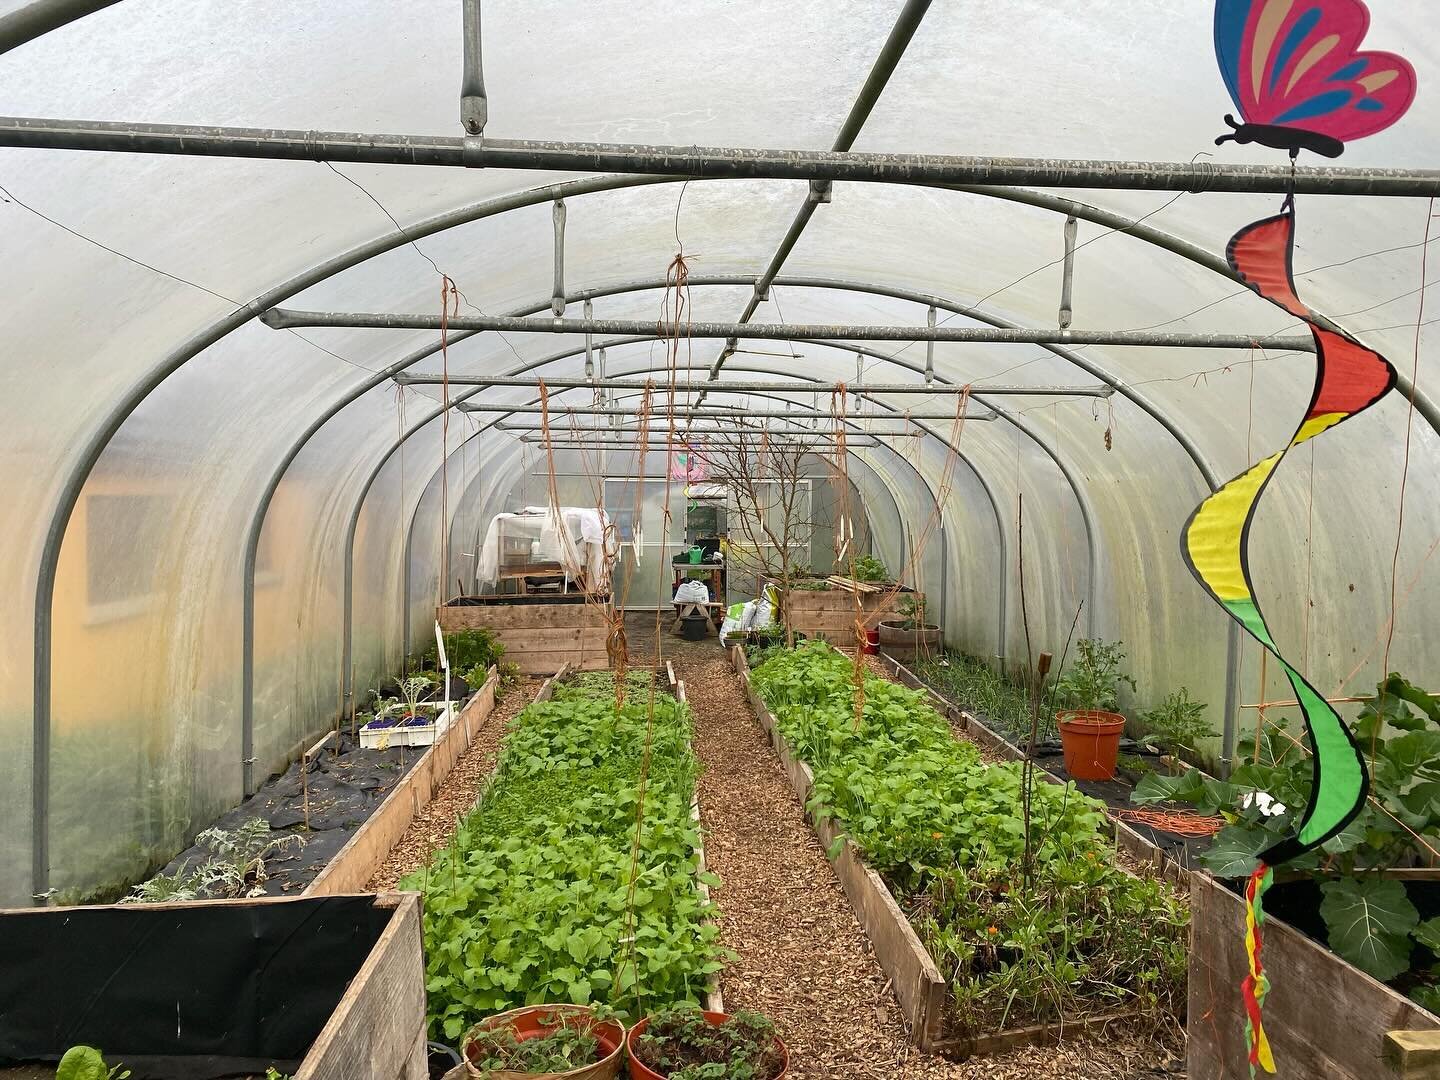 The venue for our upcoming course &ldquo;Growing in Polytunnels and Glasshouses&rdquo;.
A polytunnel gives you not only vegetables, but also a reason to get up in the morning😀,it is a necessary piece of equipment to future proof your garden and beco